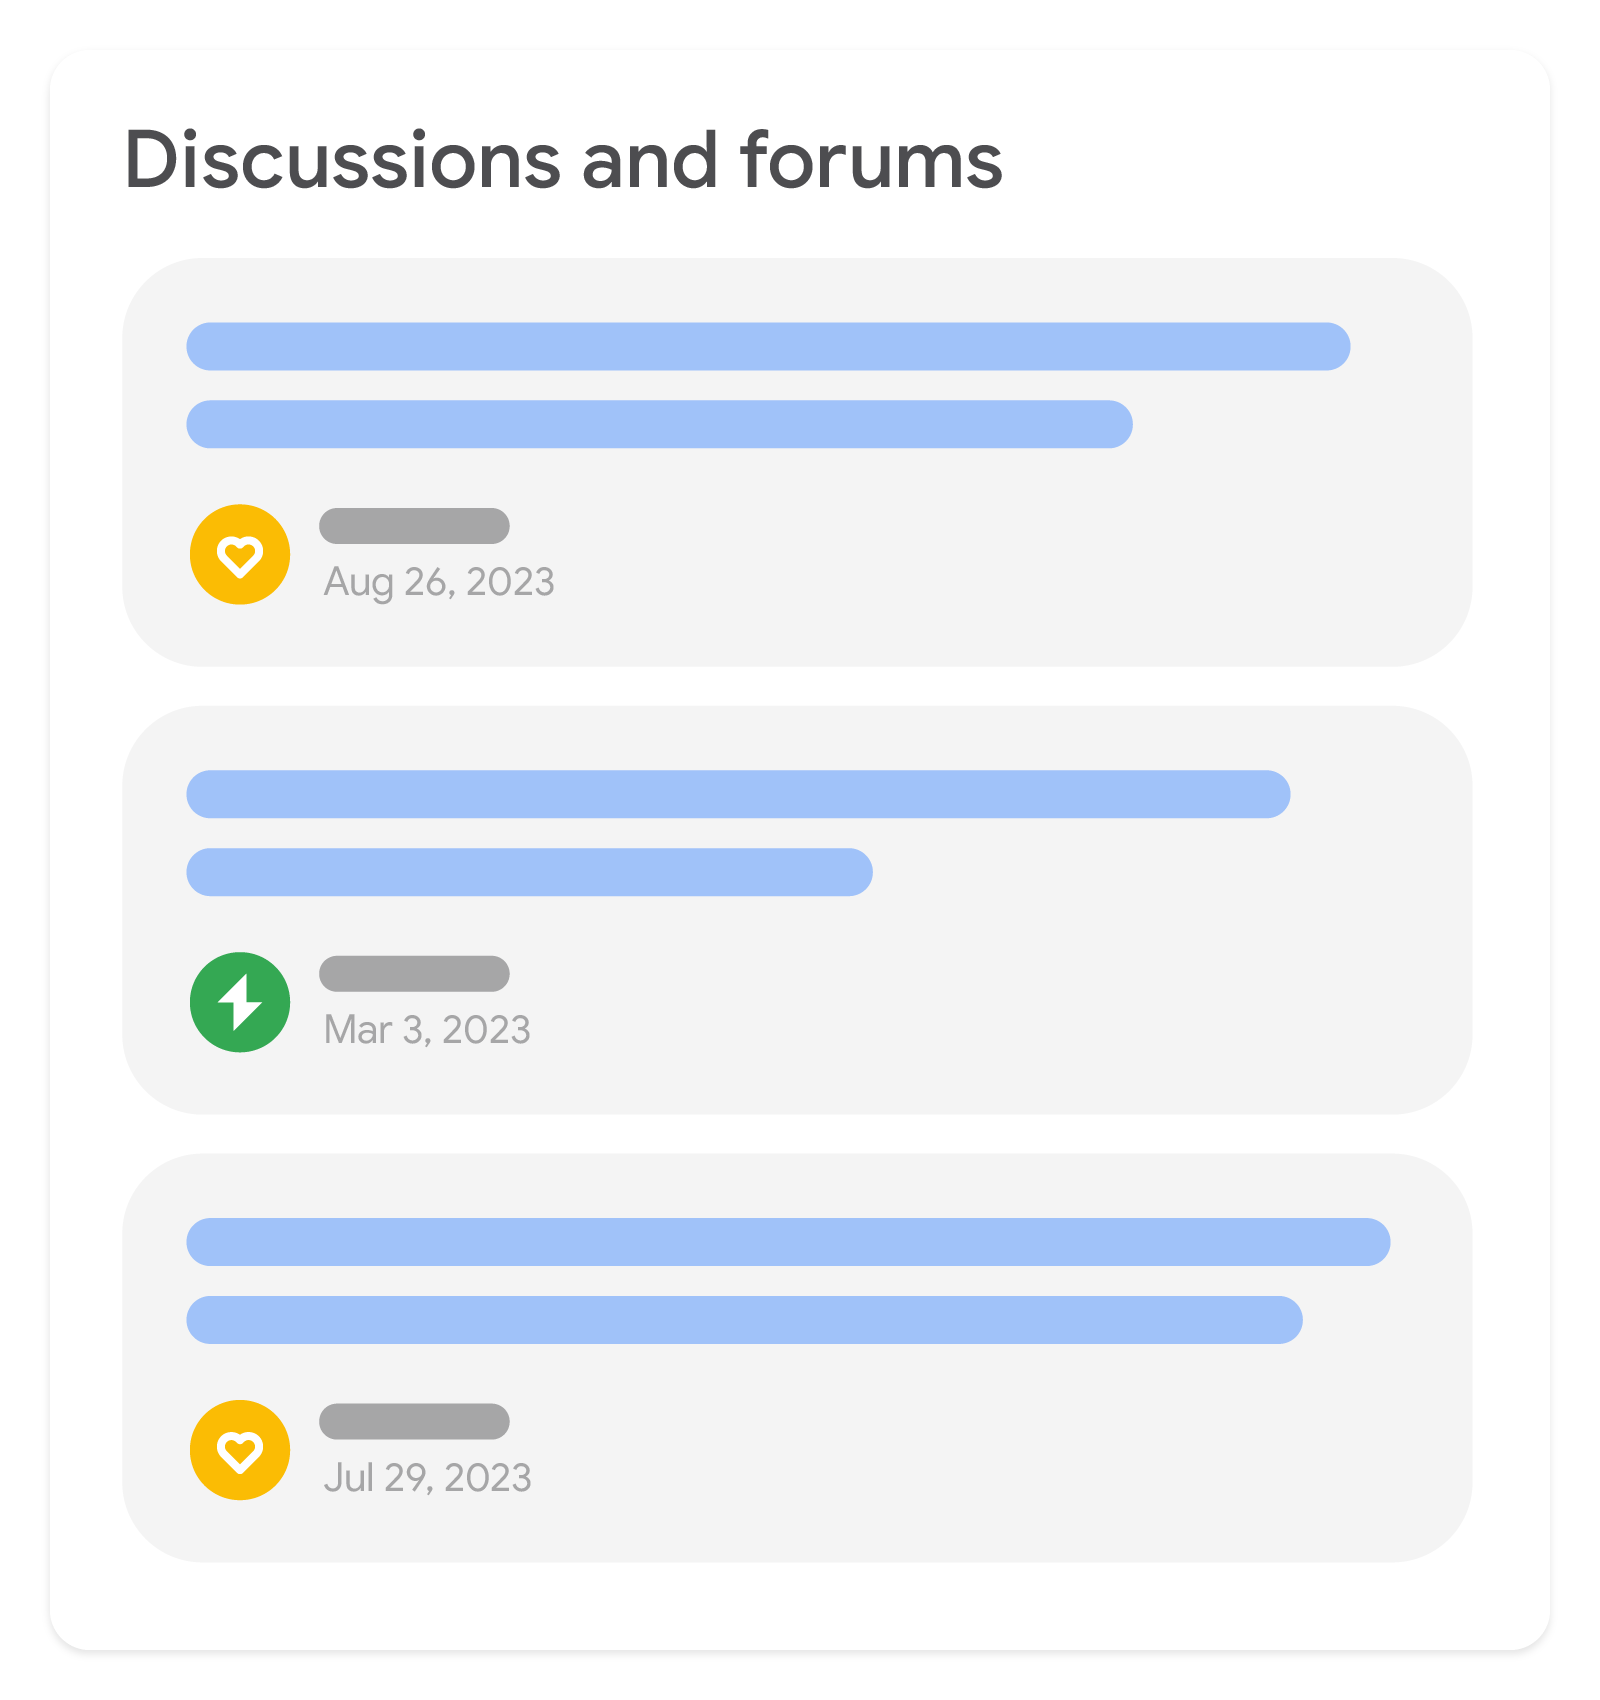 An illustration of the discussions and forums feature